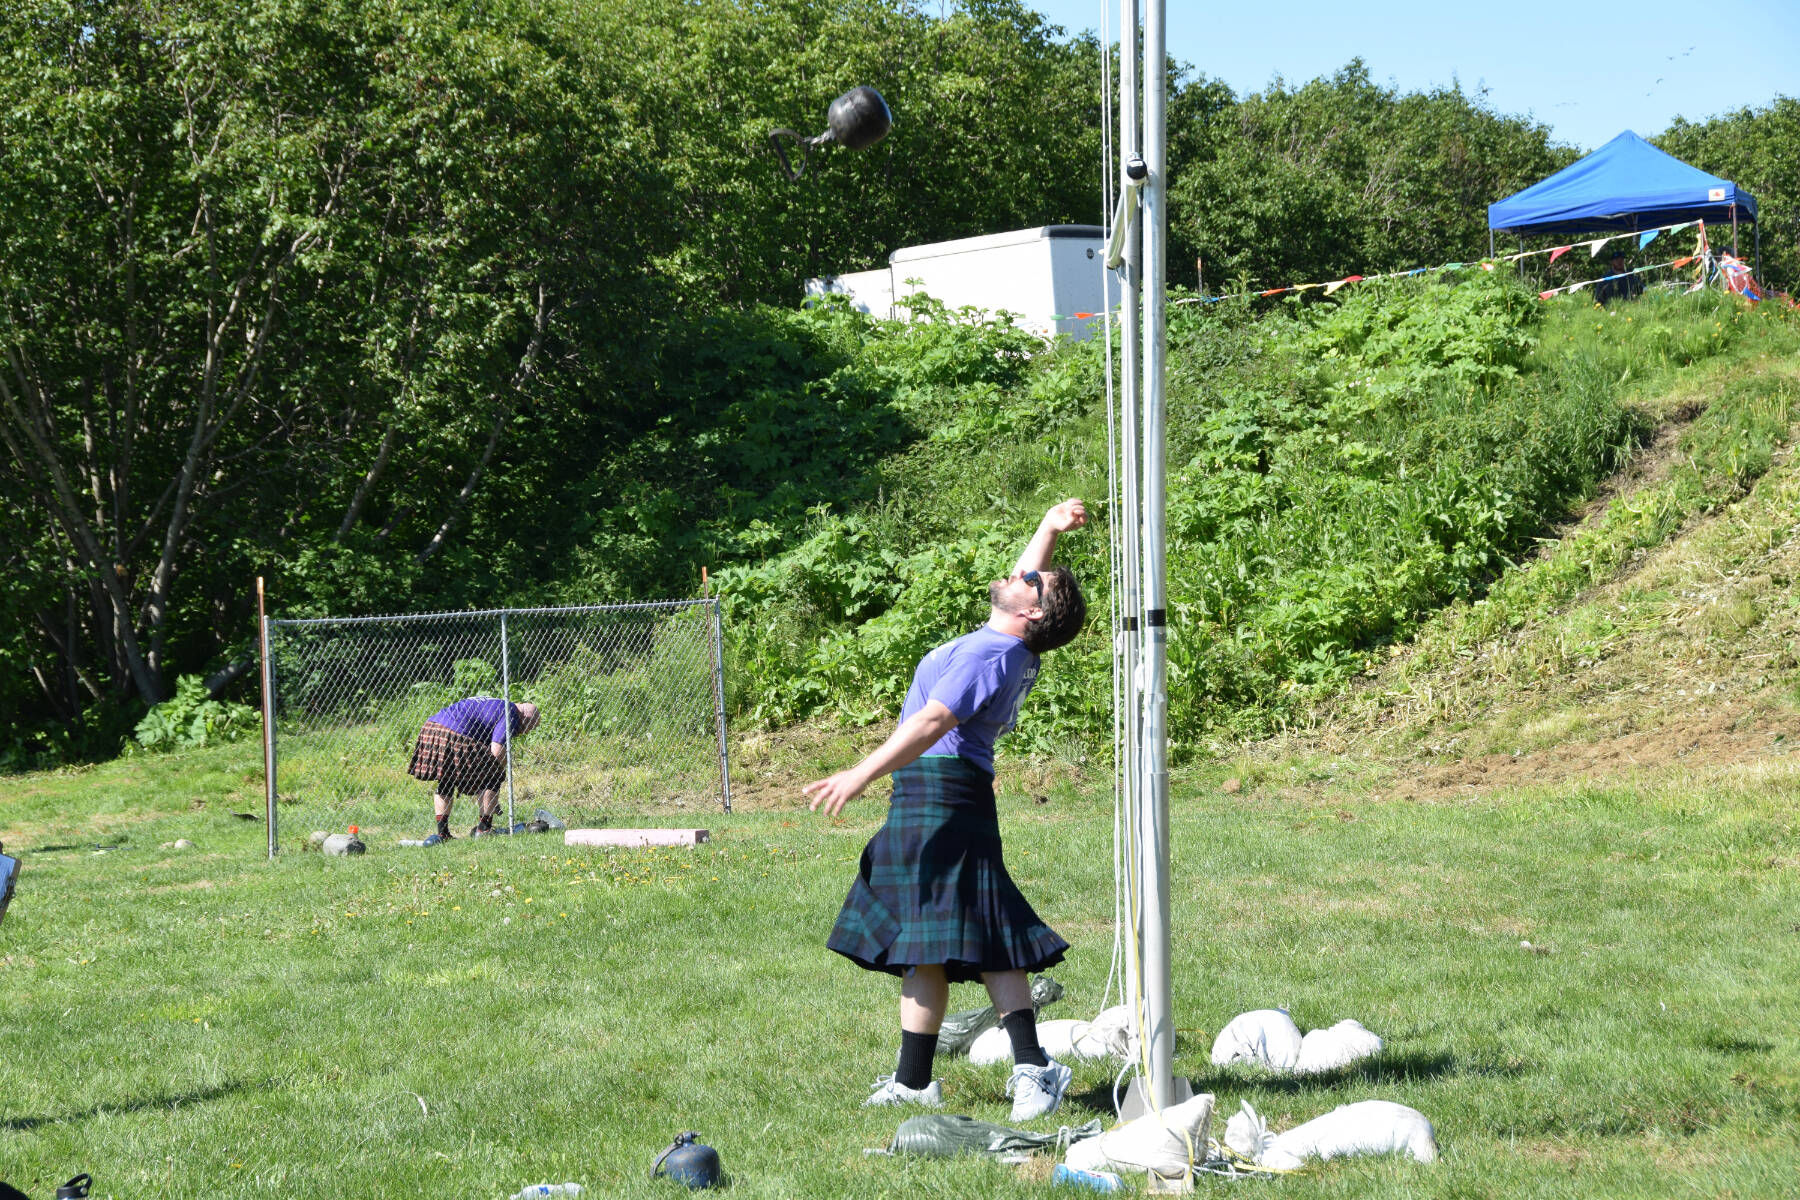 Nick Pyfer participates in the Weight Over the Bar event during the Kachemak Bay Highland Games on Saturday, July 1, 2023 at Karen Hornaday Park in Homer, Alaska. (Delcenia Cosman/Homer News)